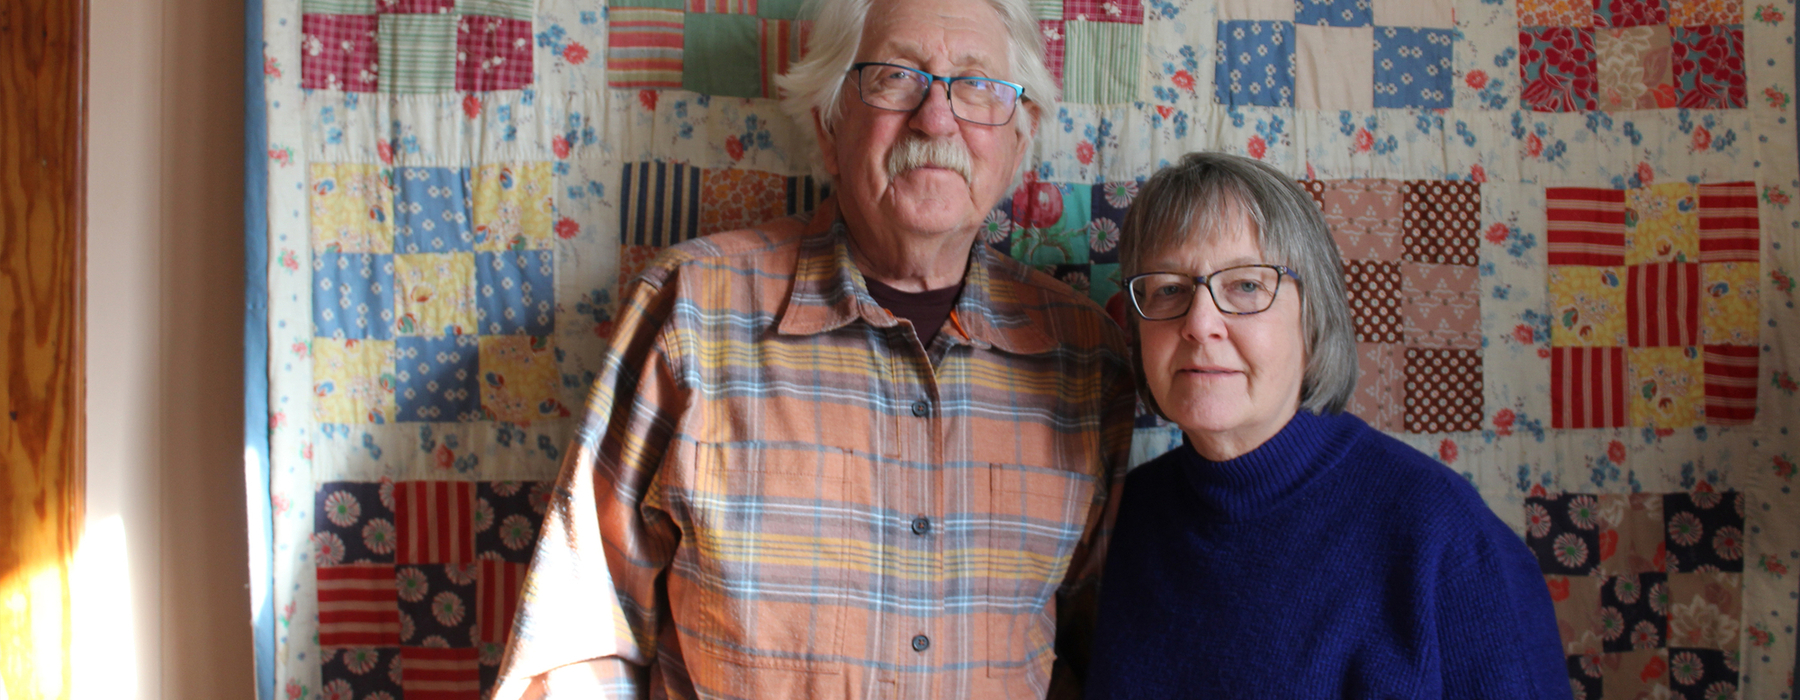 Man and woman stand in front of a quilt hanging on the wall